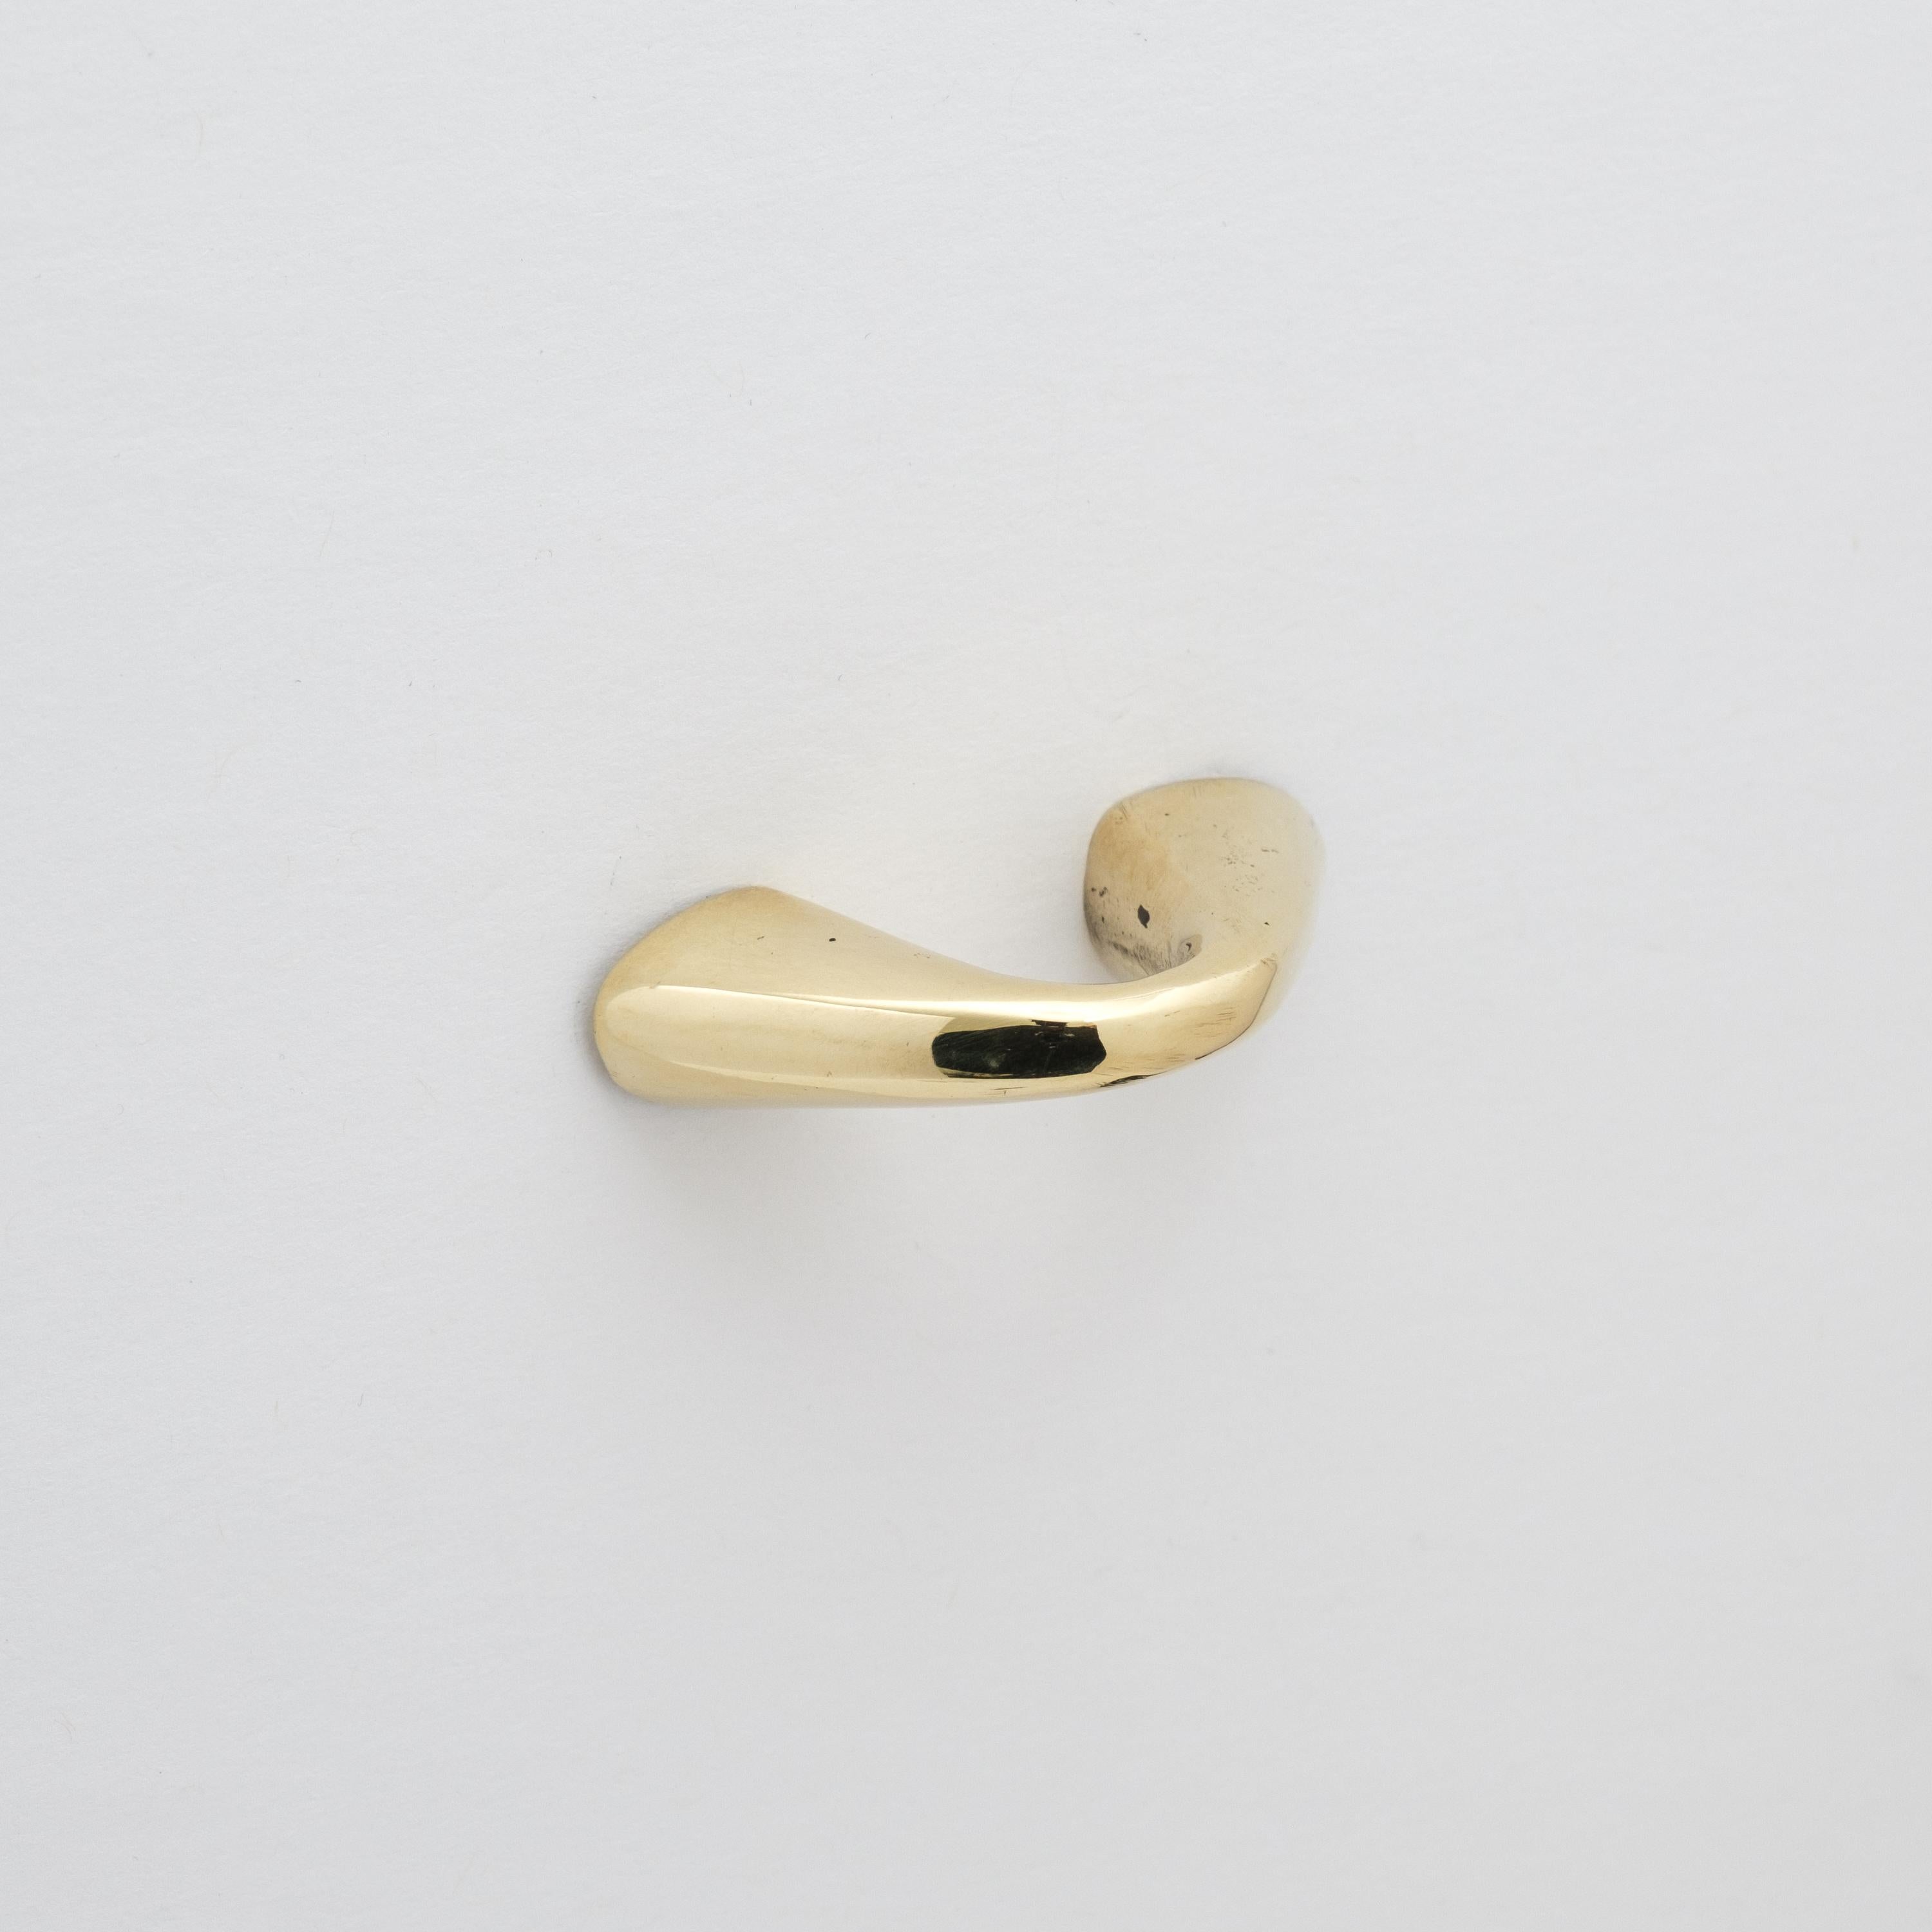 Carl Auböck Model #9031-1 polished brass drawer pull.

Designed in the 1950s, this versatile and Minimalist Viennese drawer pull is executed in polished brass by Werkstätte Carl Auböck, Austria. Its minimalist design combines clean form with